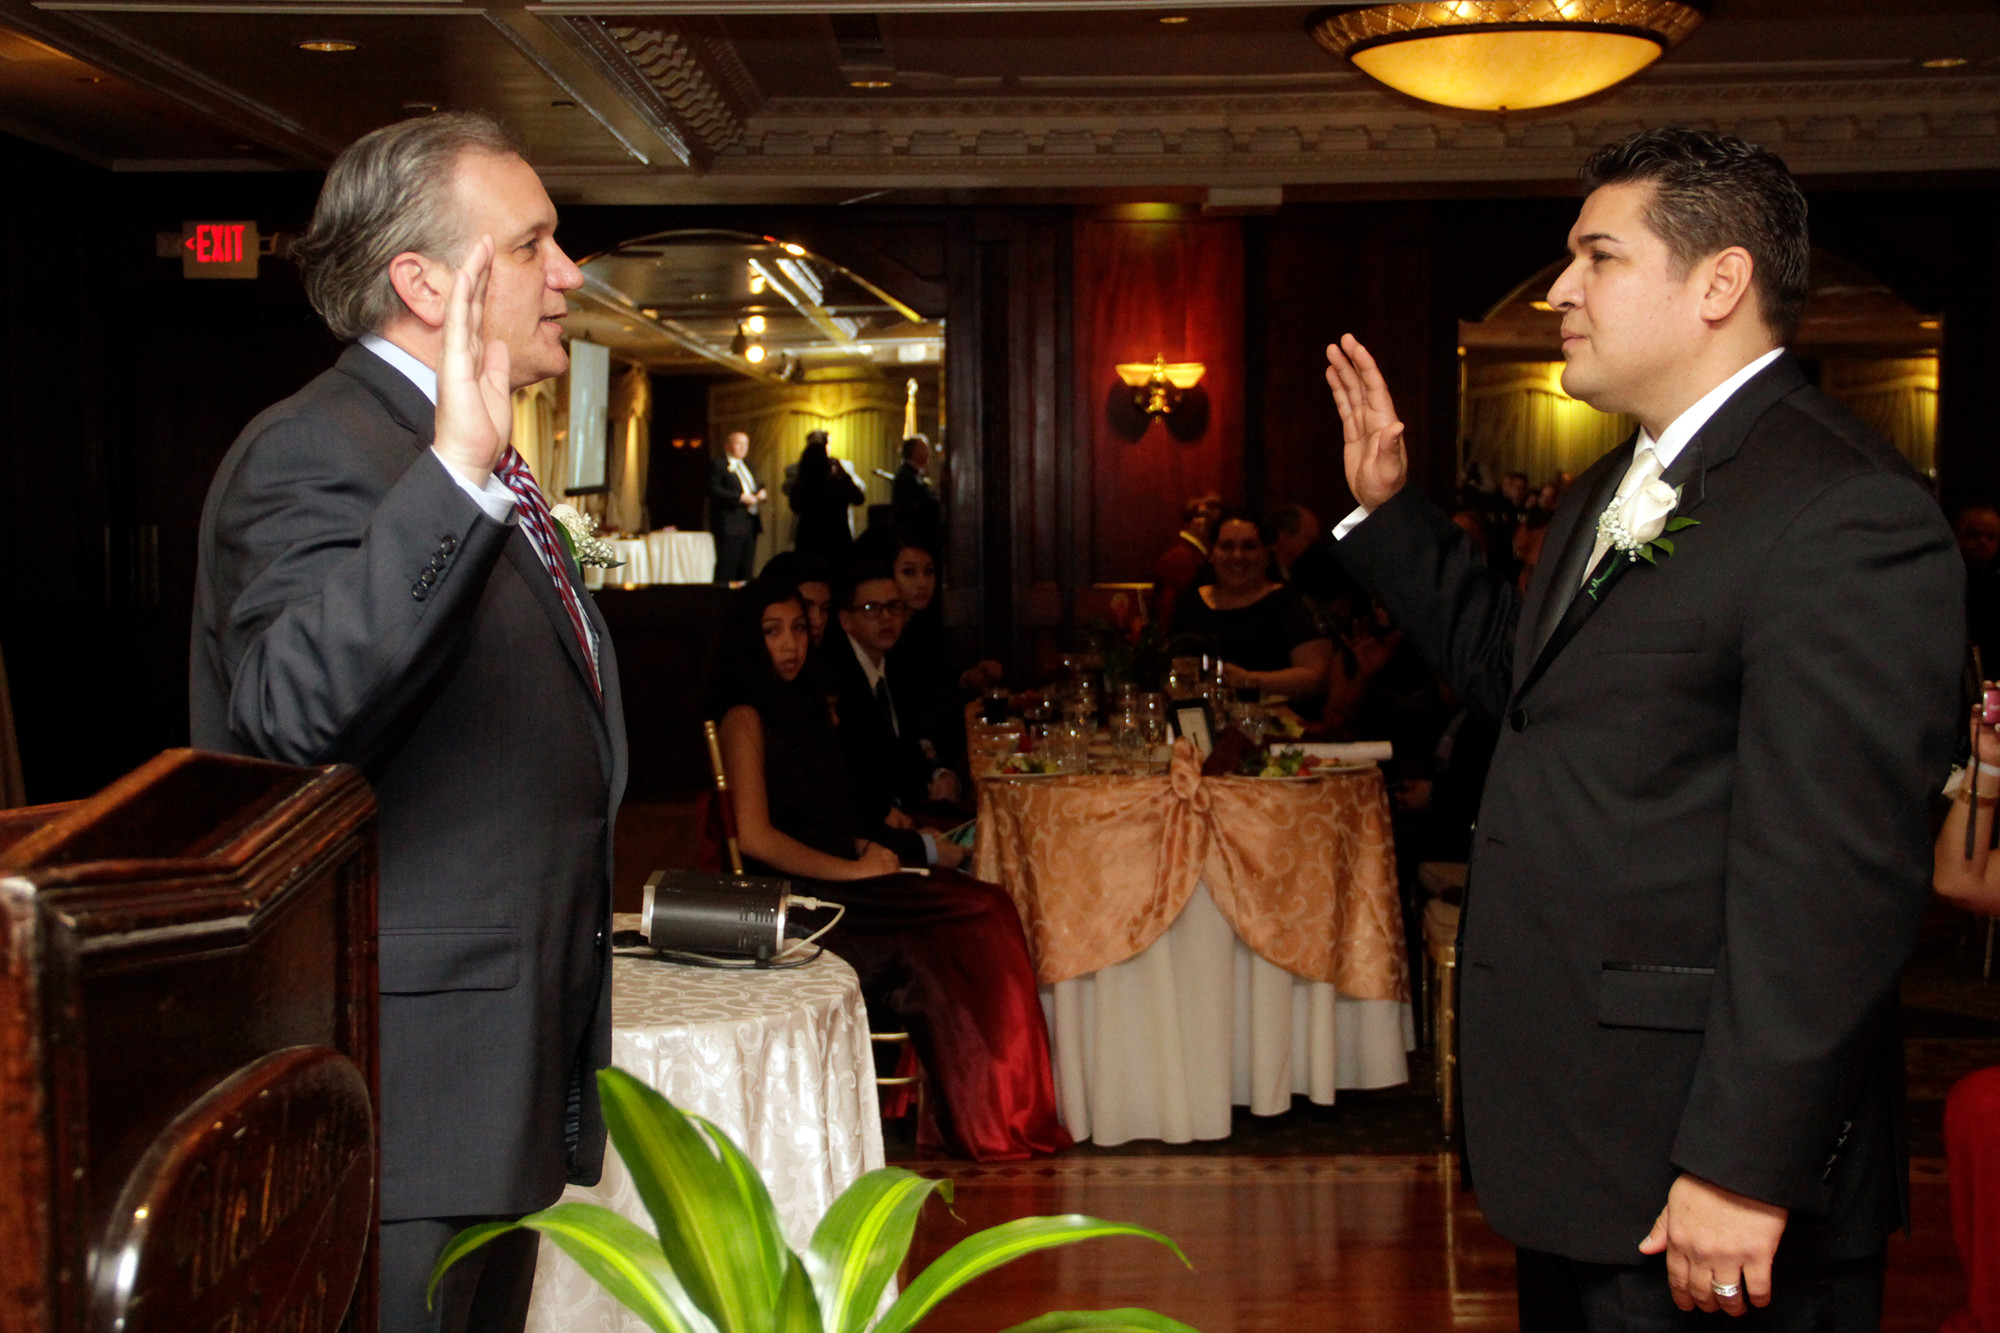 Nassau County Executive Ed Mangano swore in William Miranda, owner of Madison Pierce Real Estate, as the new president of the East Meadow Chamber of Commerce at the group’s 61st annual installation ceremony on Jan. 29.